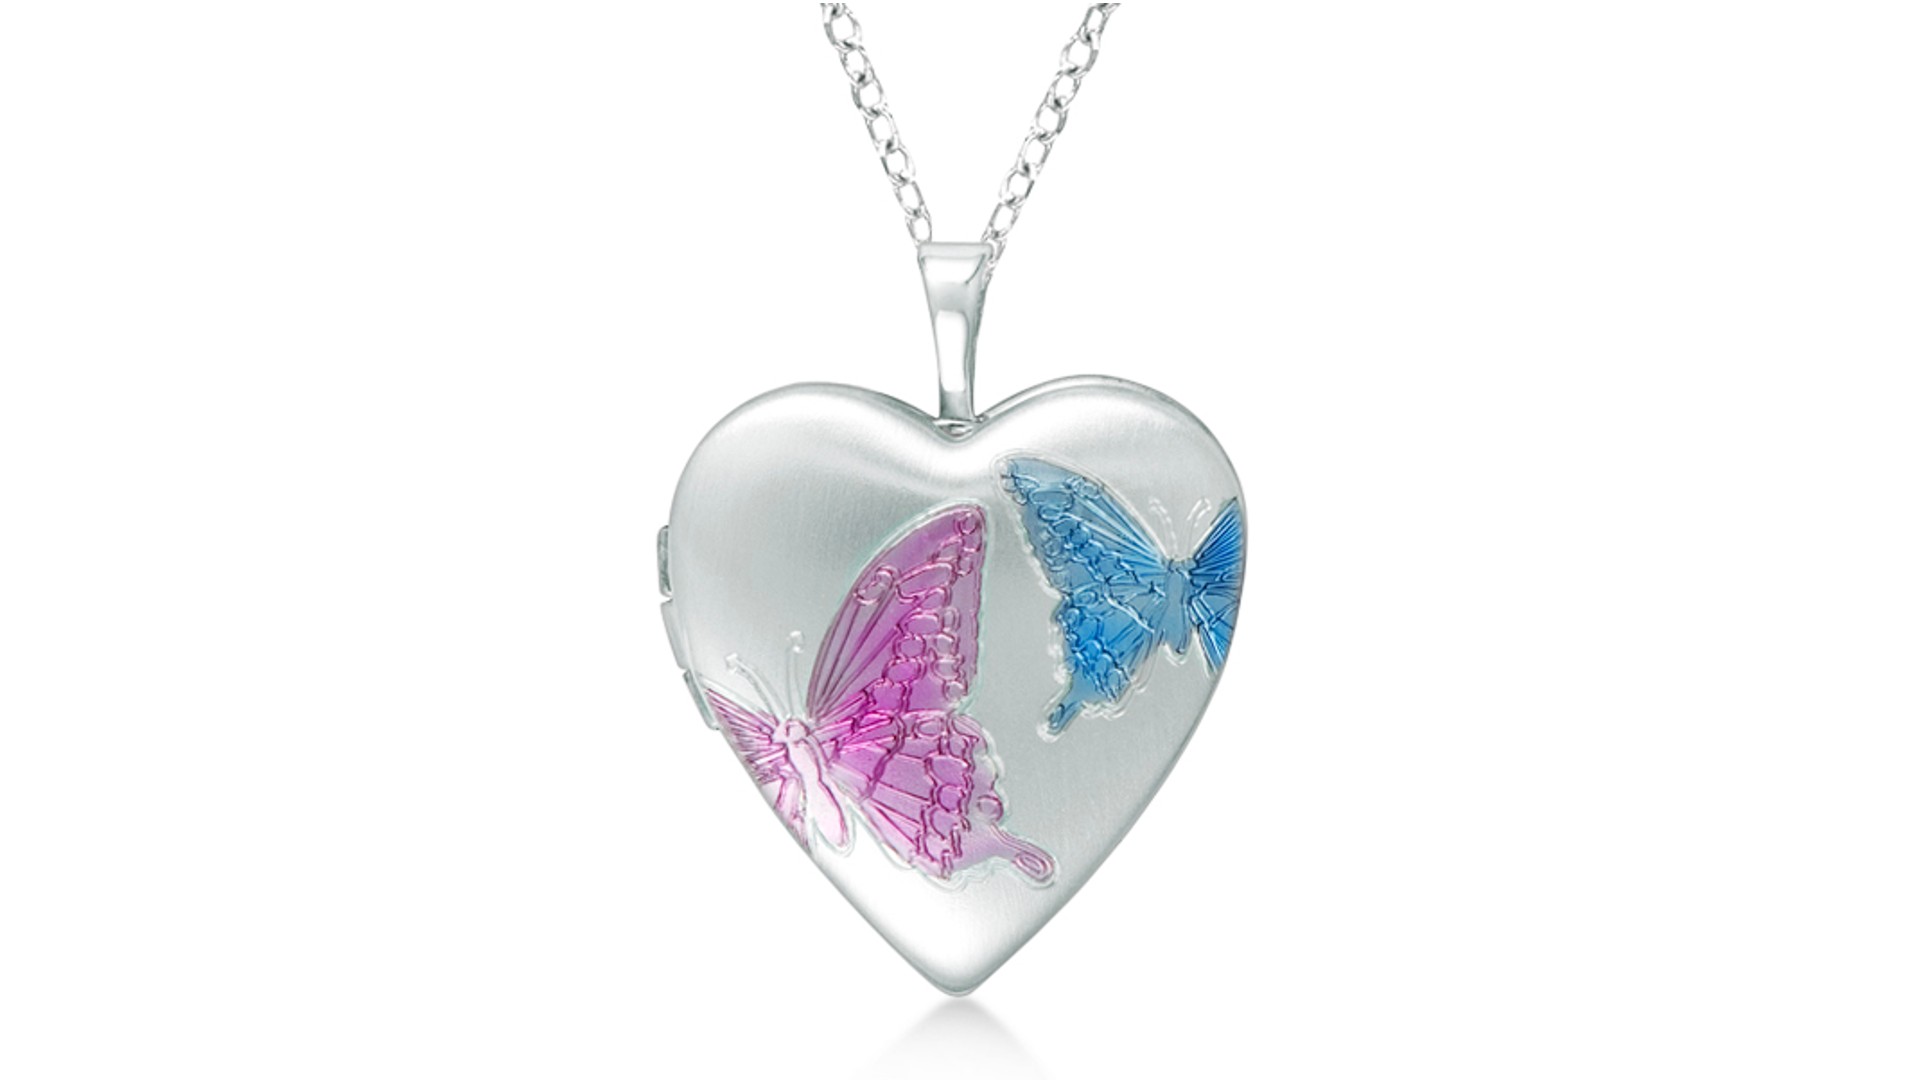 Valentine’s Day Gift Guide: a Heart-Shaped Butterfly Design Pendant Locket